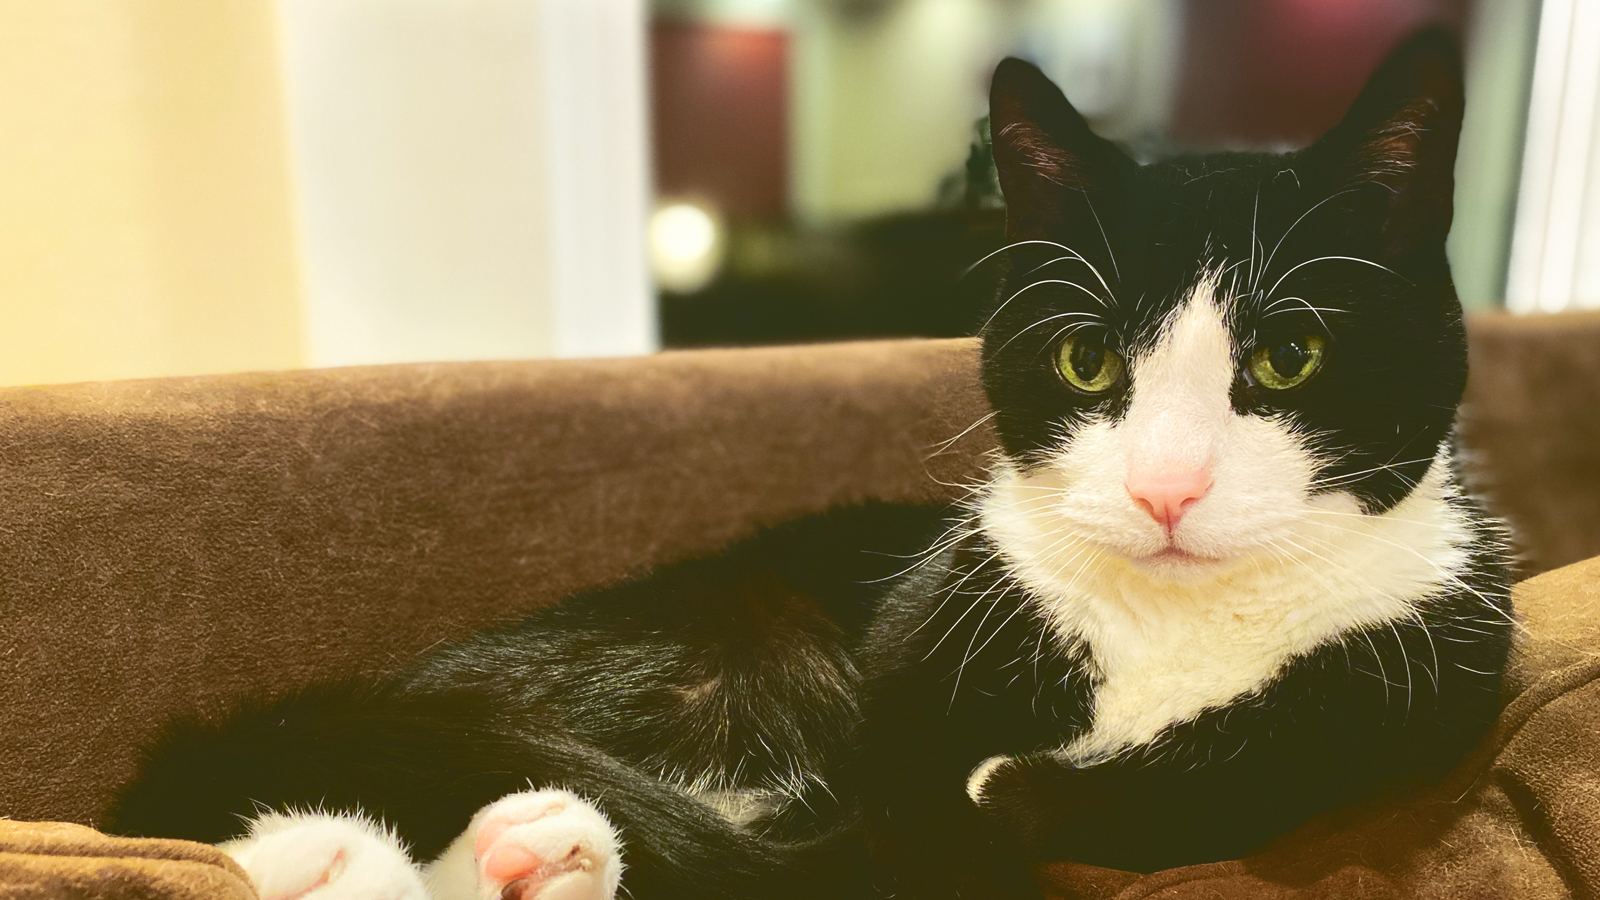 A black and white tuxedo cat on a couch